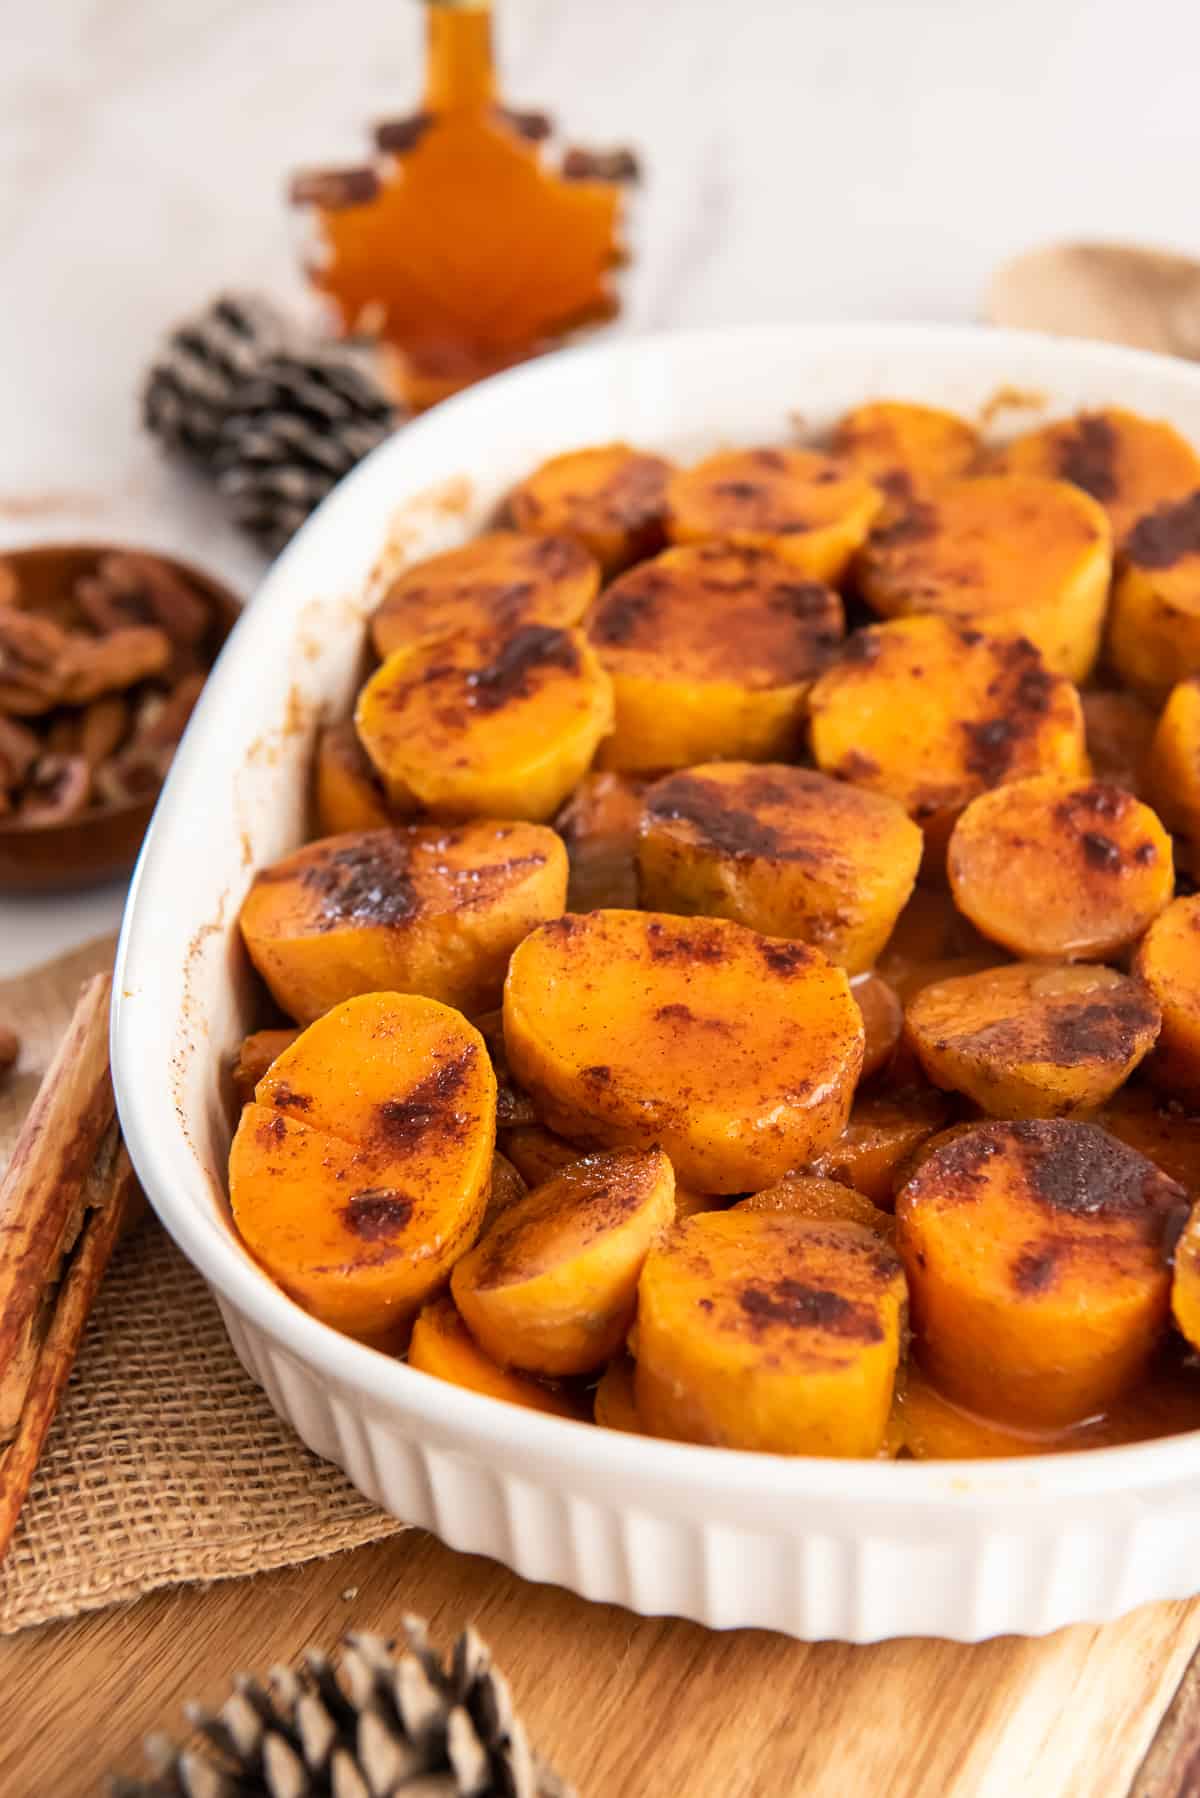 A white baking dish filled with sweet potatoes topped with cinnamon.